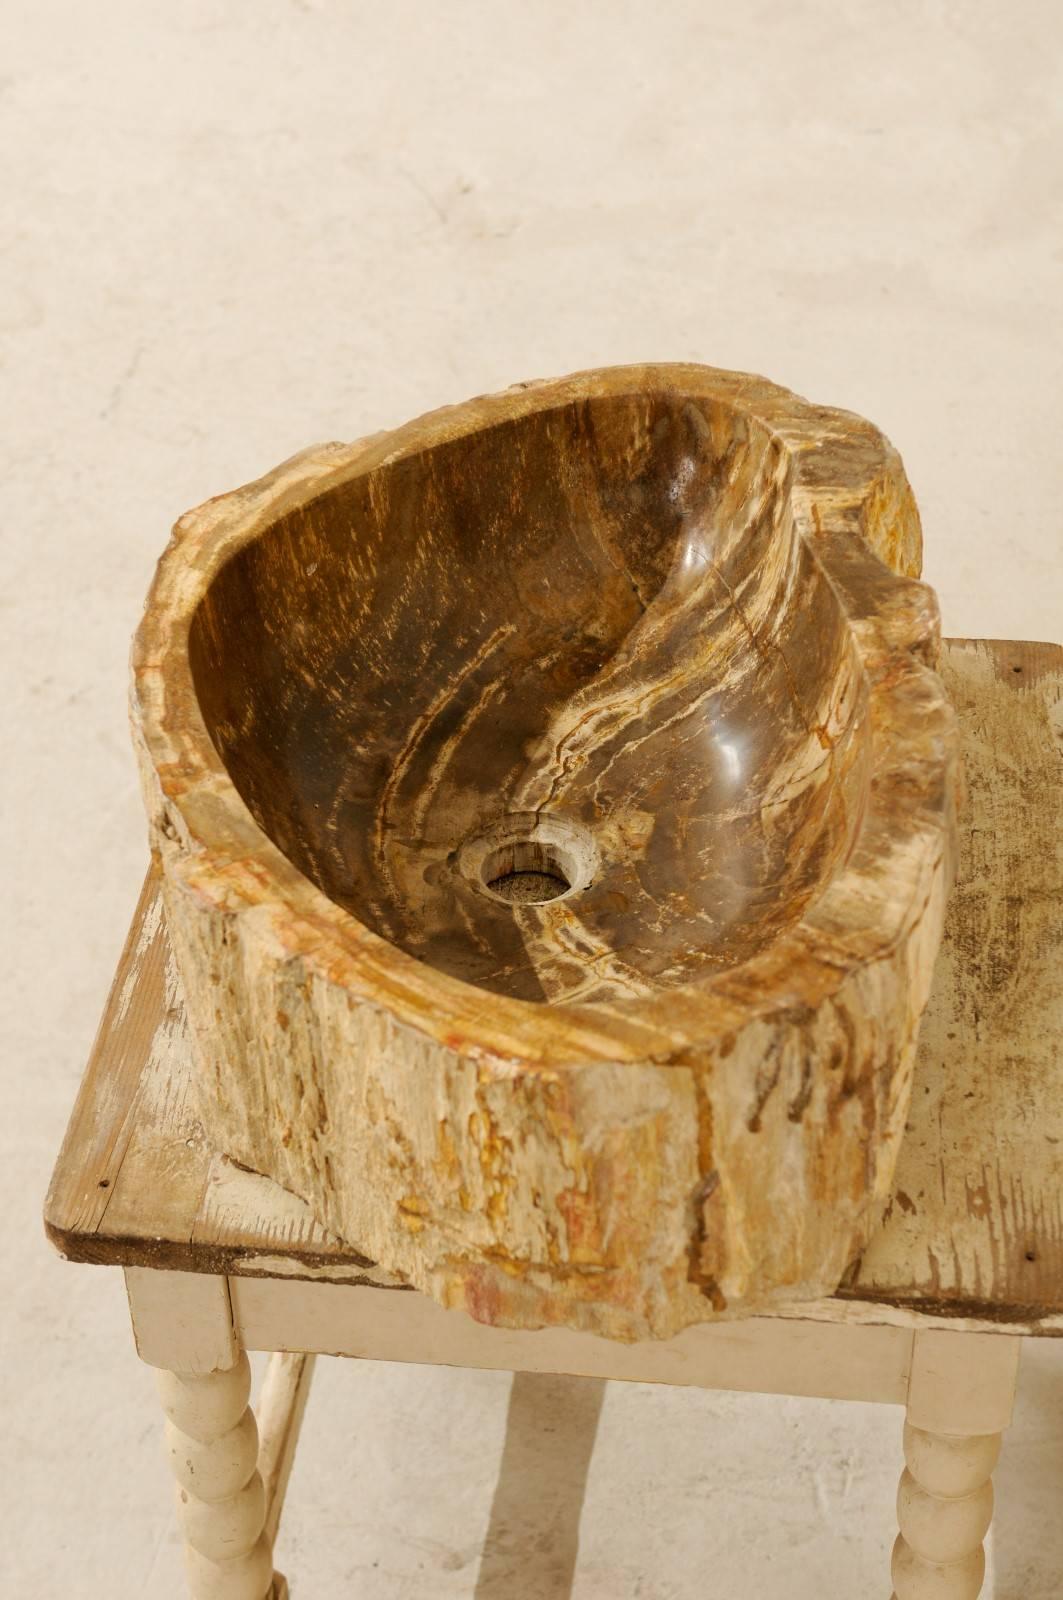 20th Century Polished Petrified Wood Sink of Neutral Cream, Tan, Light Brown and Beige Hues